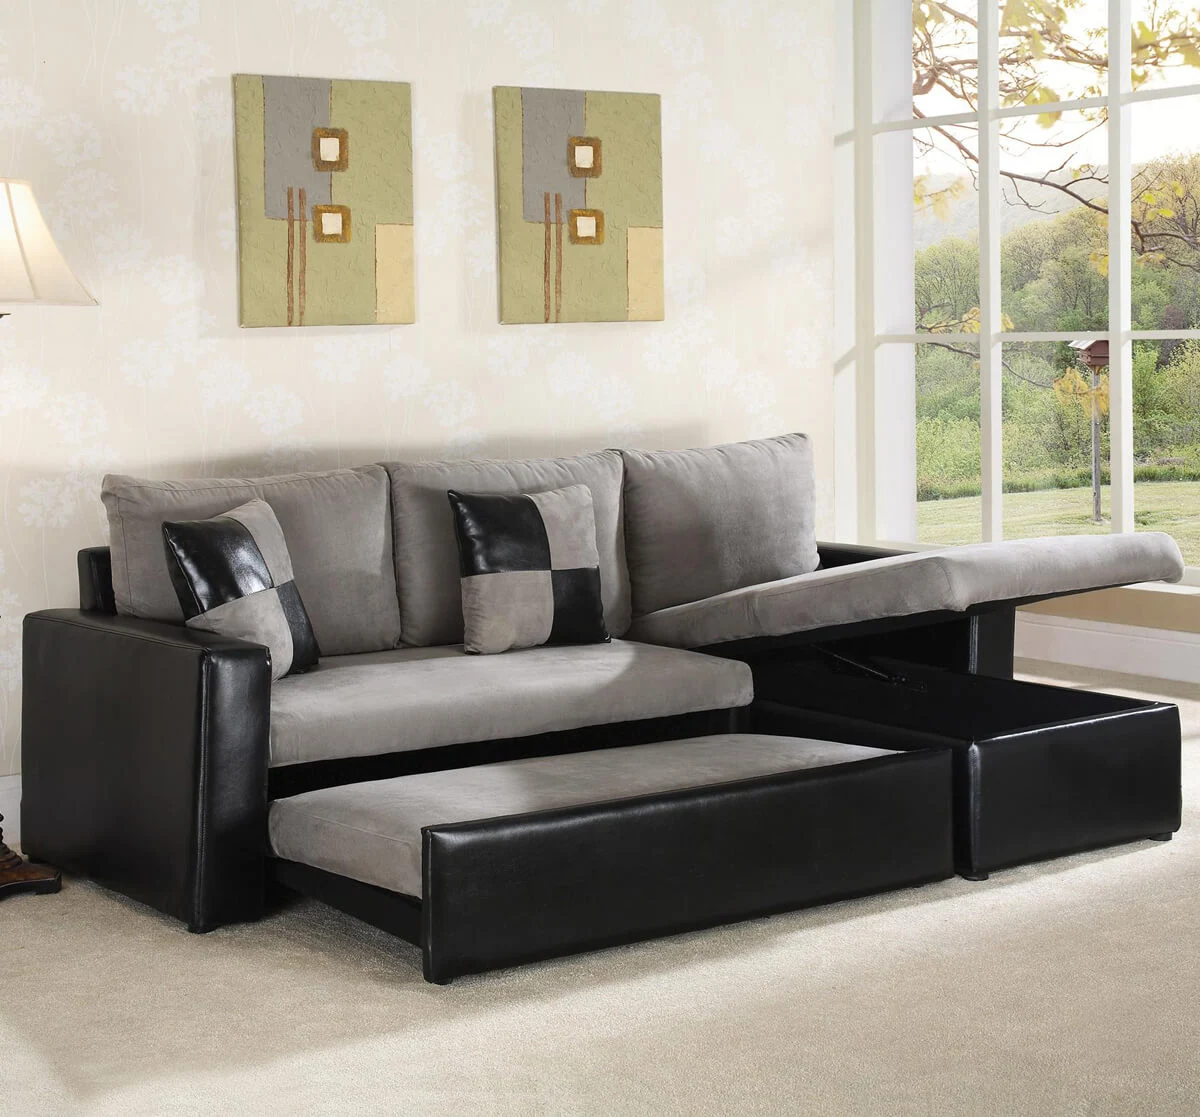 types of leather, types of leather couches, types of fake leather couches, types of leather couches for dogs, couch, types of wood, types of cushions, types of sofas, types, types of sofa beds, types of furniture, different types of leather, different types of cushion design, different types of foam uses, different types of foam, styles & types guide, sofa types, 10 best couches, best couch with usb, types of foam uses in mattress and sofa furniture, furniture styles